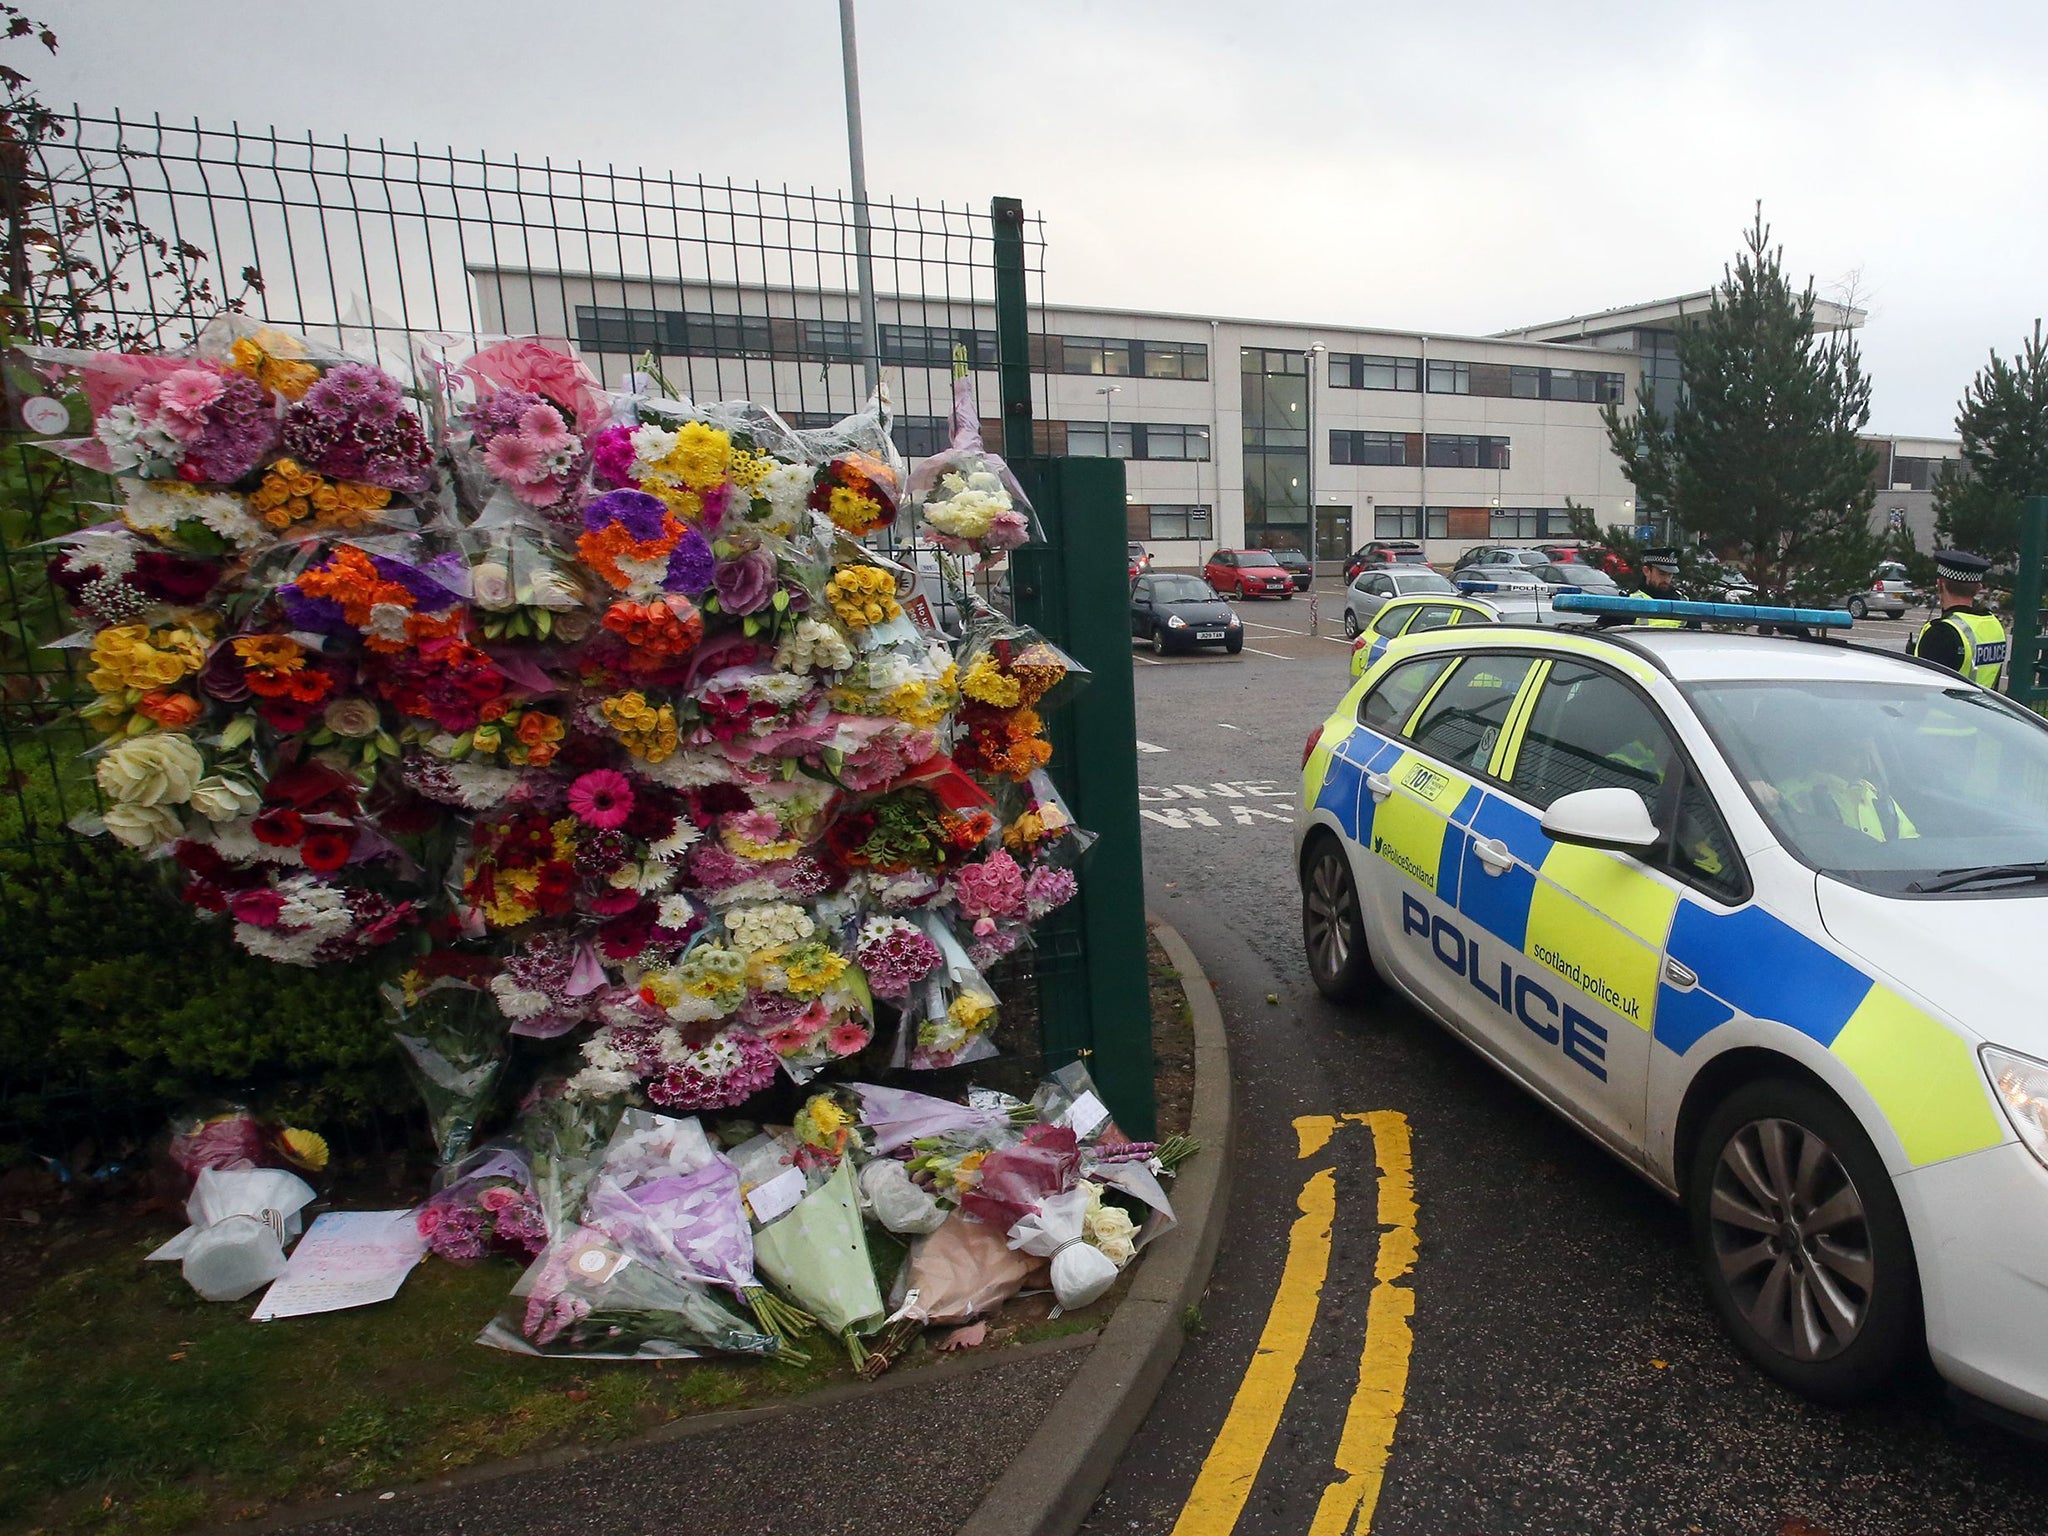 The school community was 'totally devastated' by the incident